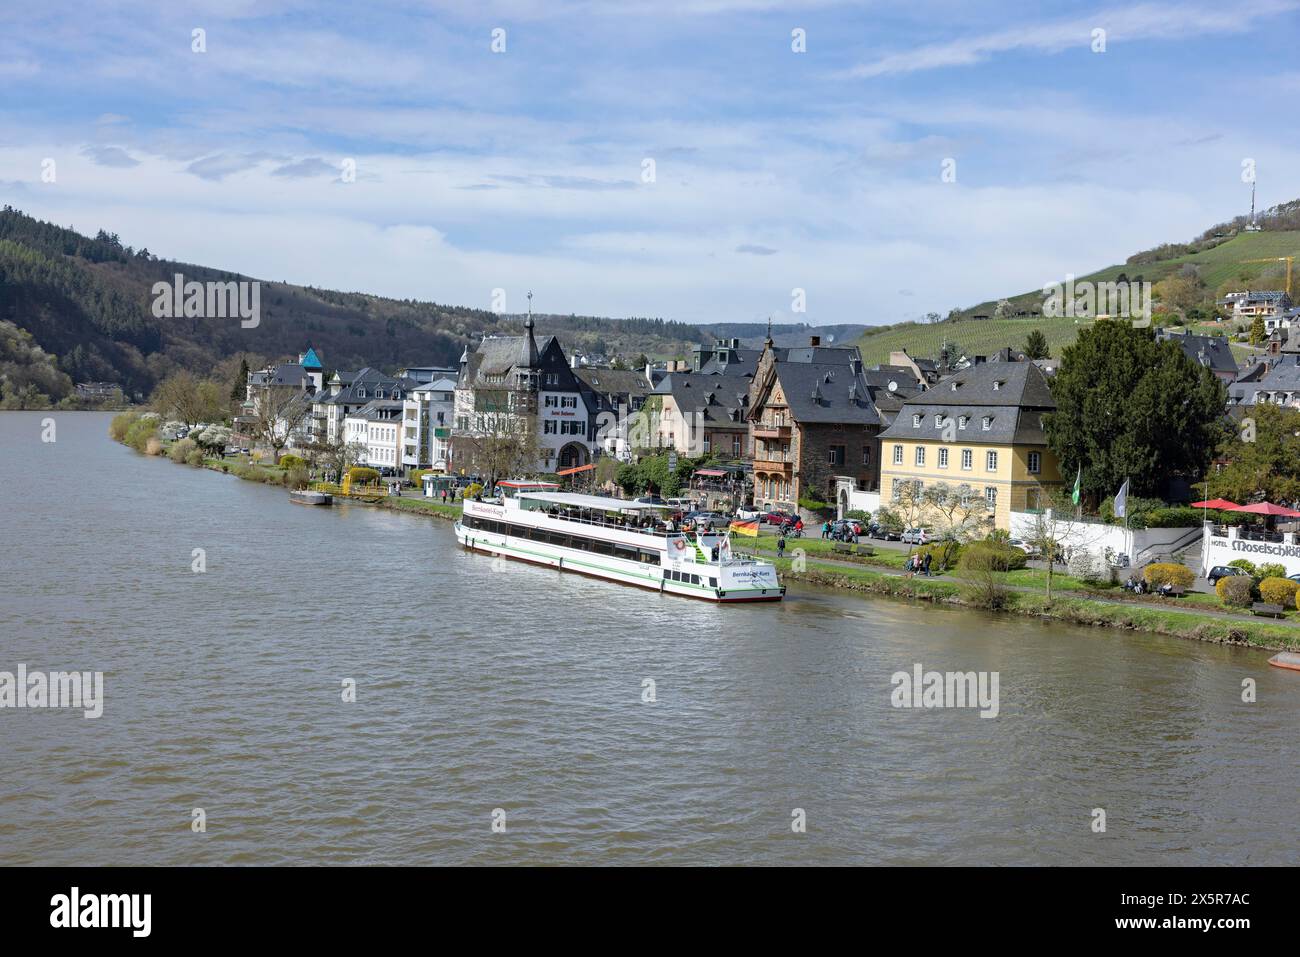 Excursion boat anchored on the riverside promenade in front of a row of picturesque half-timbered houses, Traben-Trarbach, Rhineland-Palatinate Stock Photo